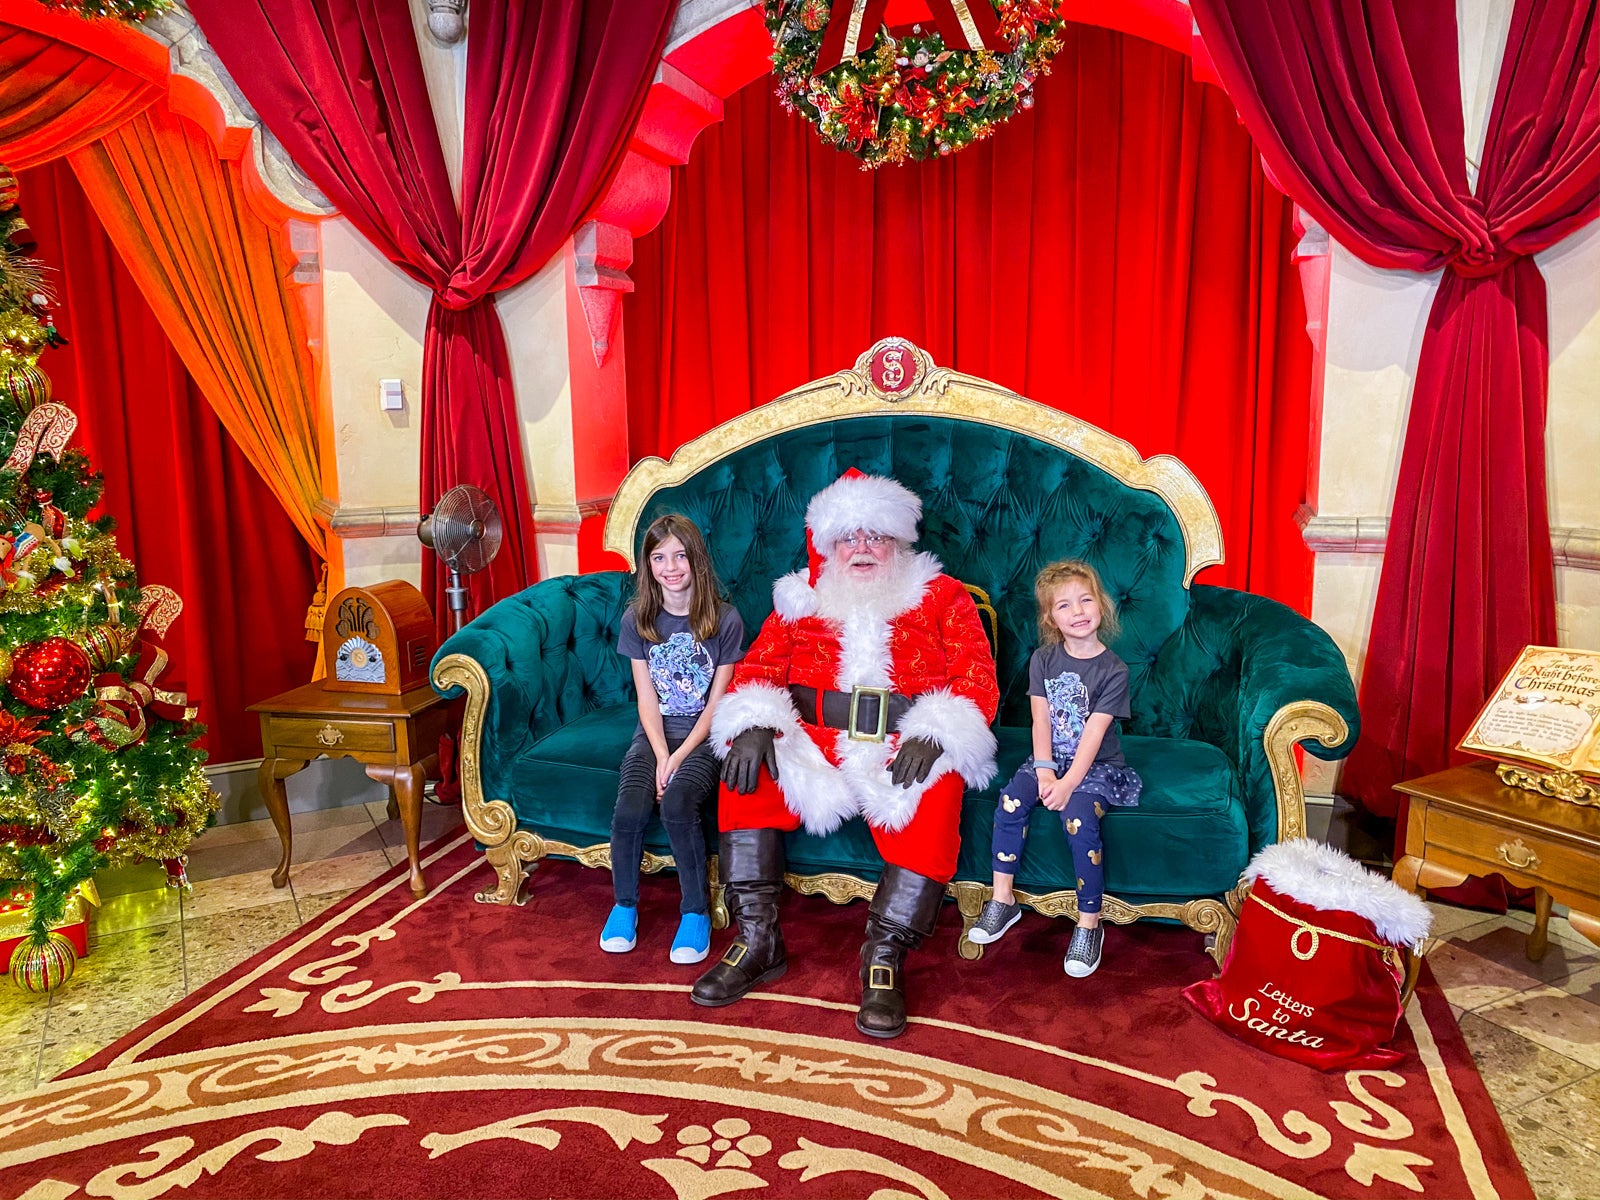 You are currently viewing Holiday magic without spending lots of cash: 7 free (or very cheap) Disney World Christmas activities